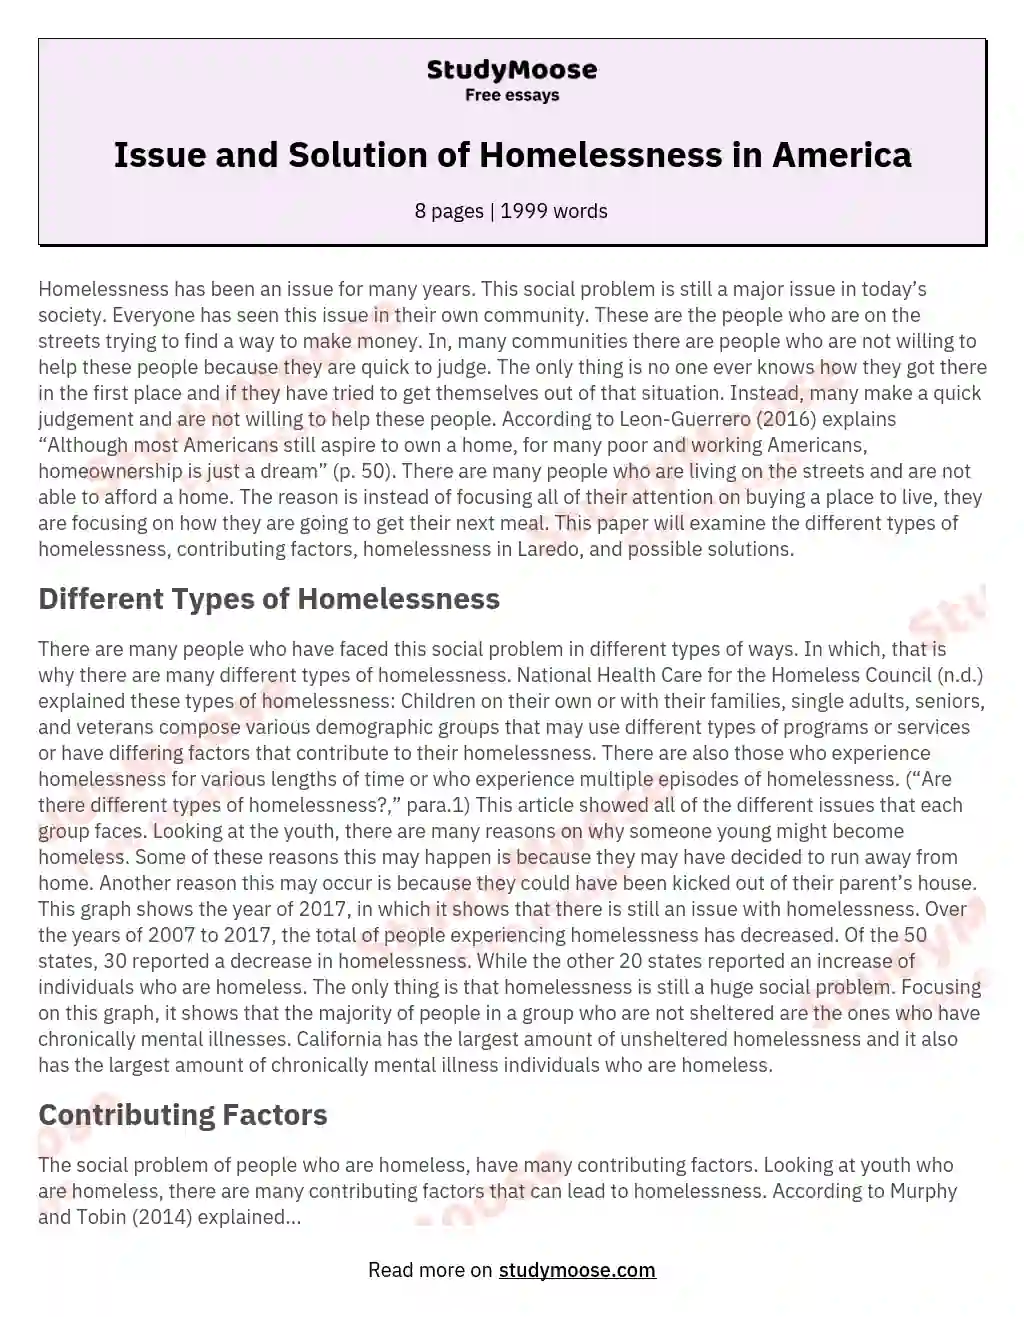 Issue and Solution of Homelessness in America essay